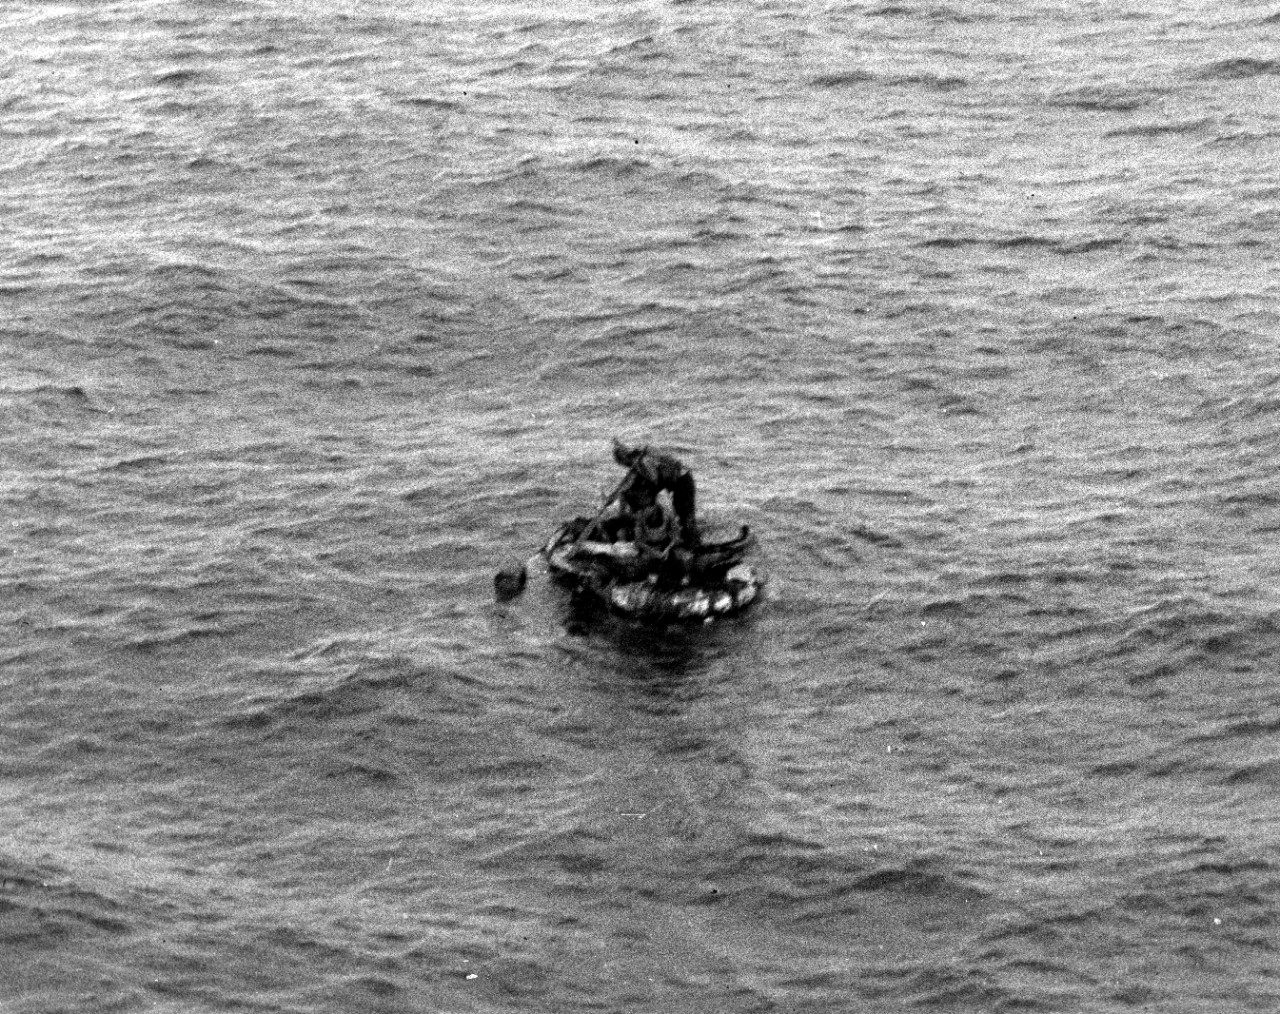 As first seen from Helm’s bridge on 17 May 1942, one of the four survivors on a raft from the sunken oiler Neosho stands to attract attention. (U.S. Navy Photograph 80-G-32131, National Archives and Records Administration, Still Pictures Division...